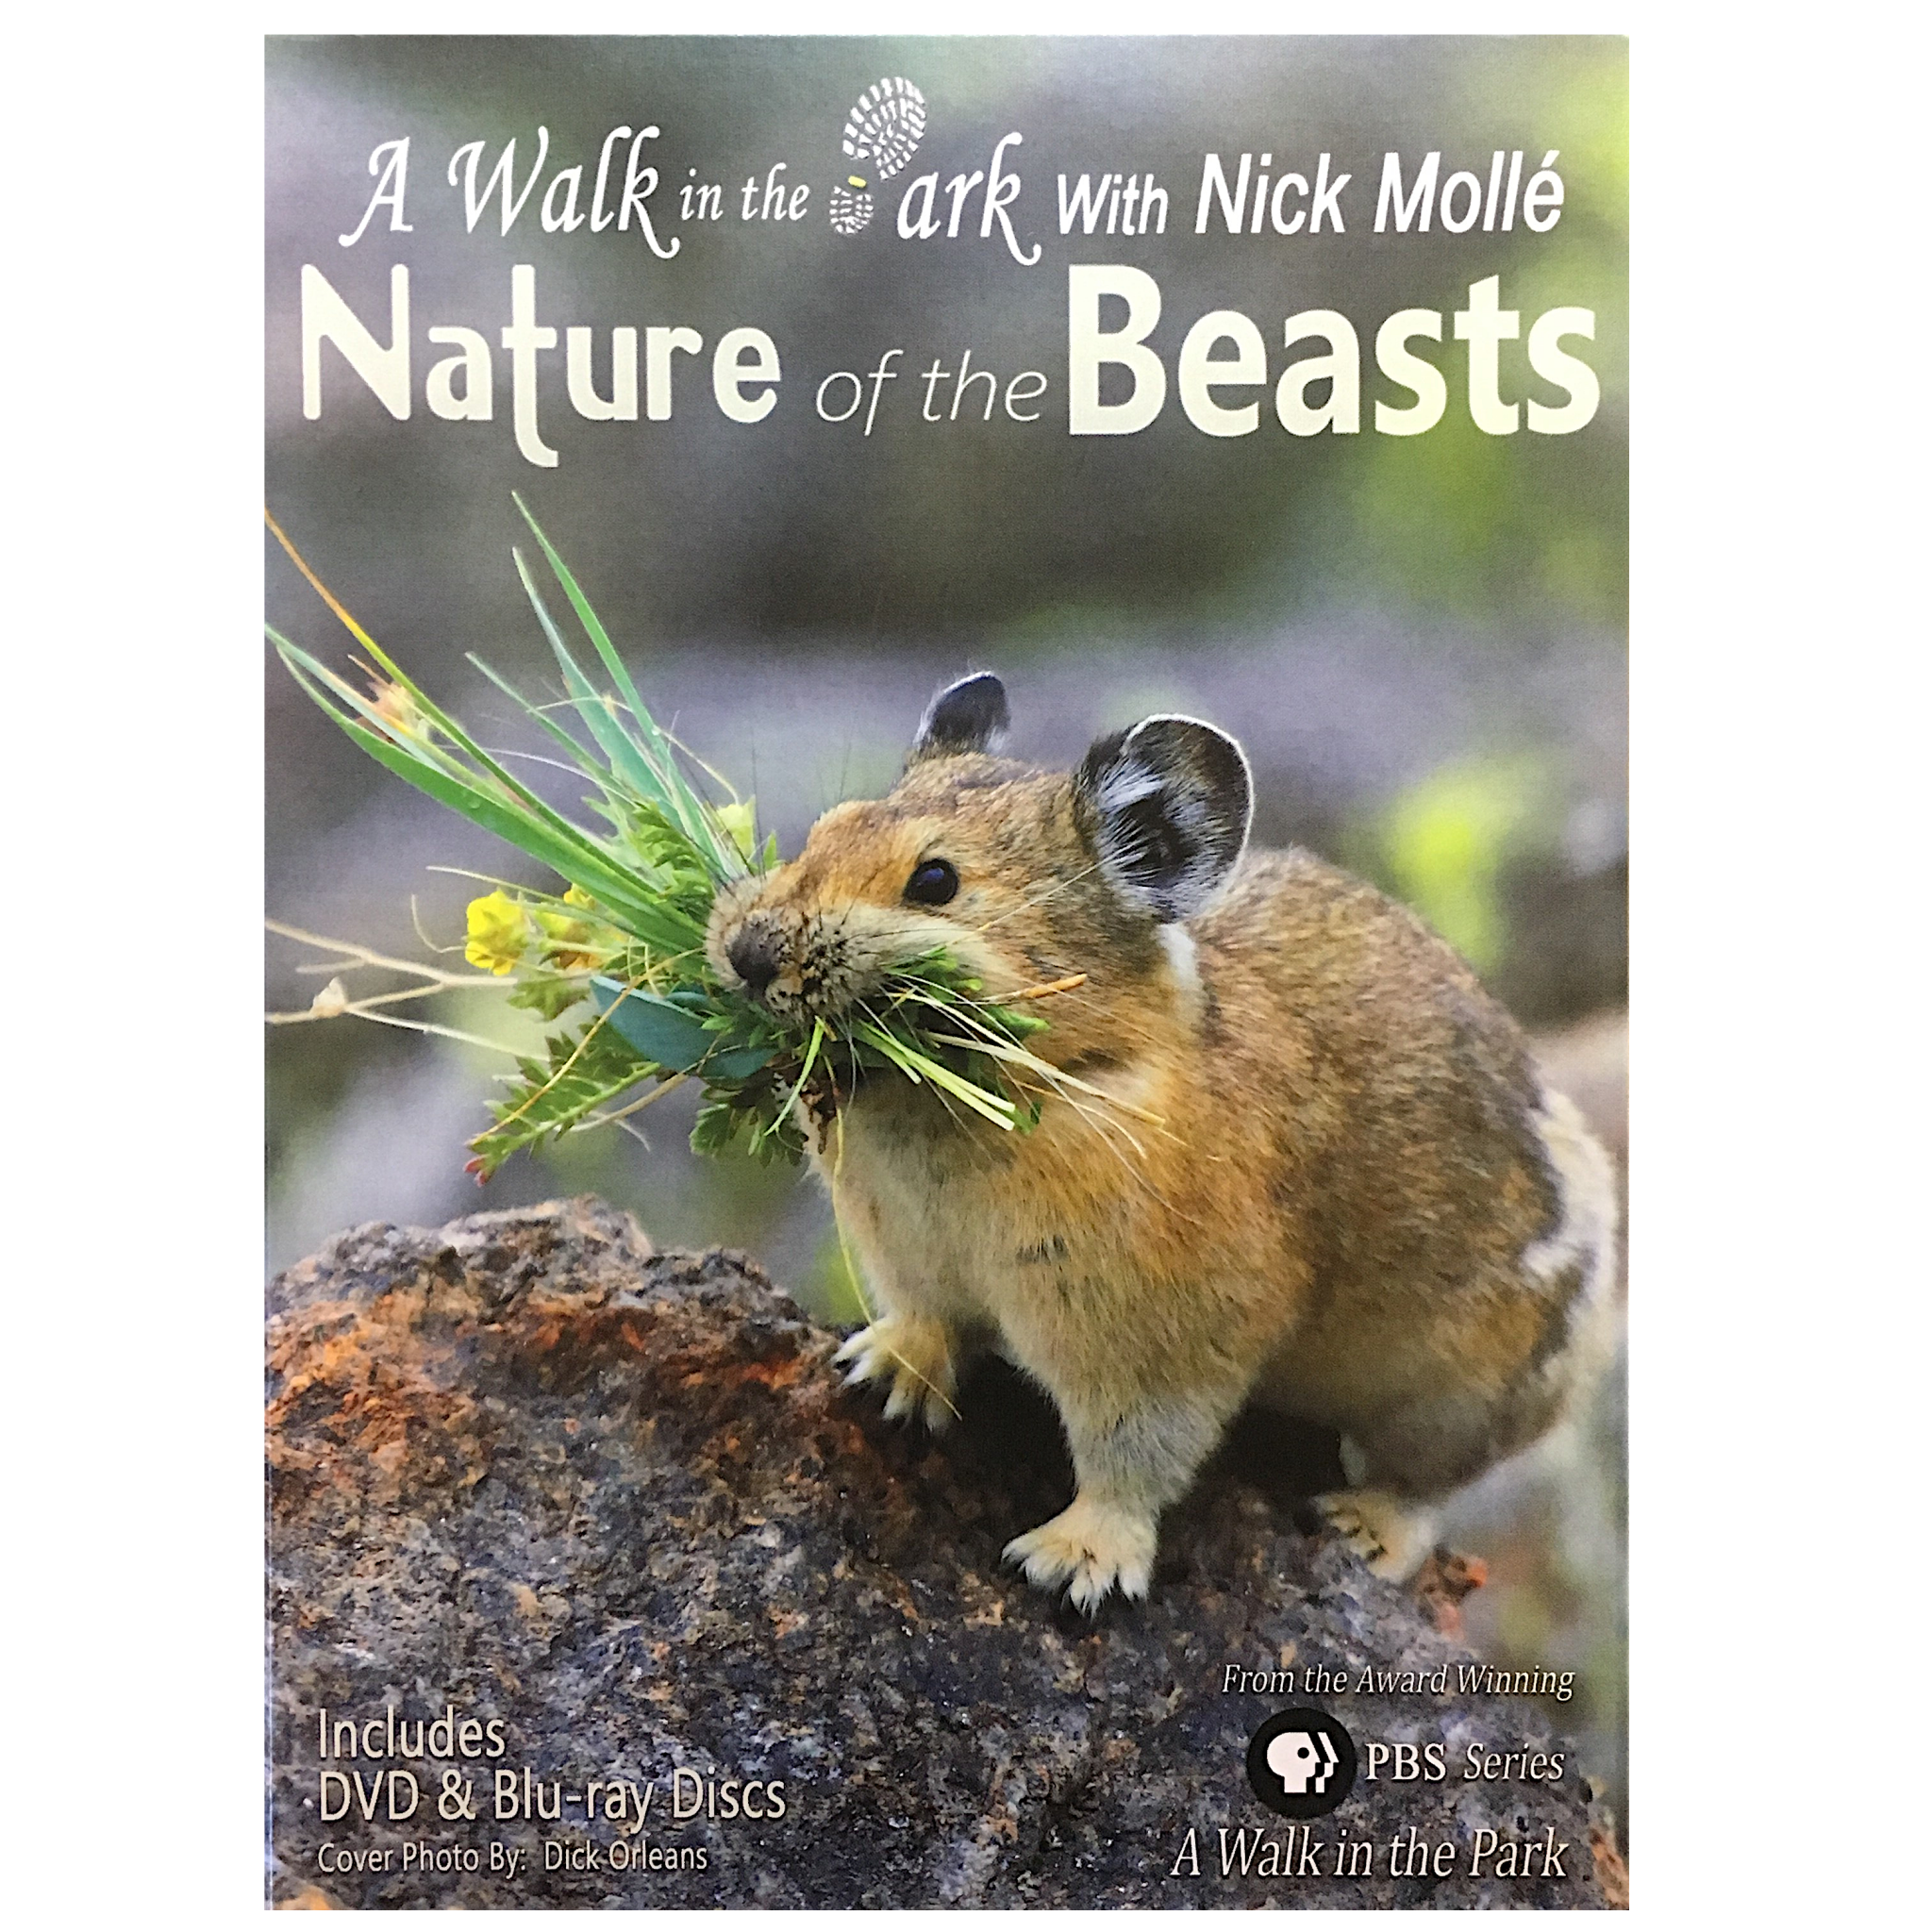 A Walk in the Park with Nick Mollé: Nature of the Beasts DVD